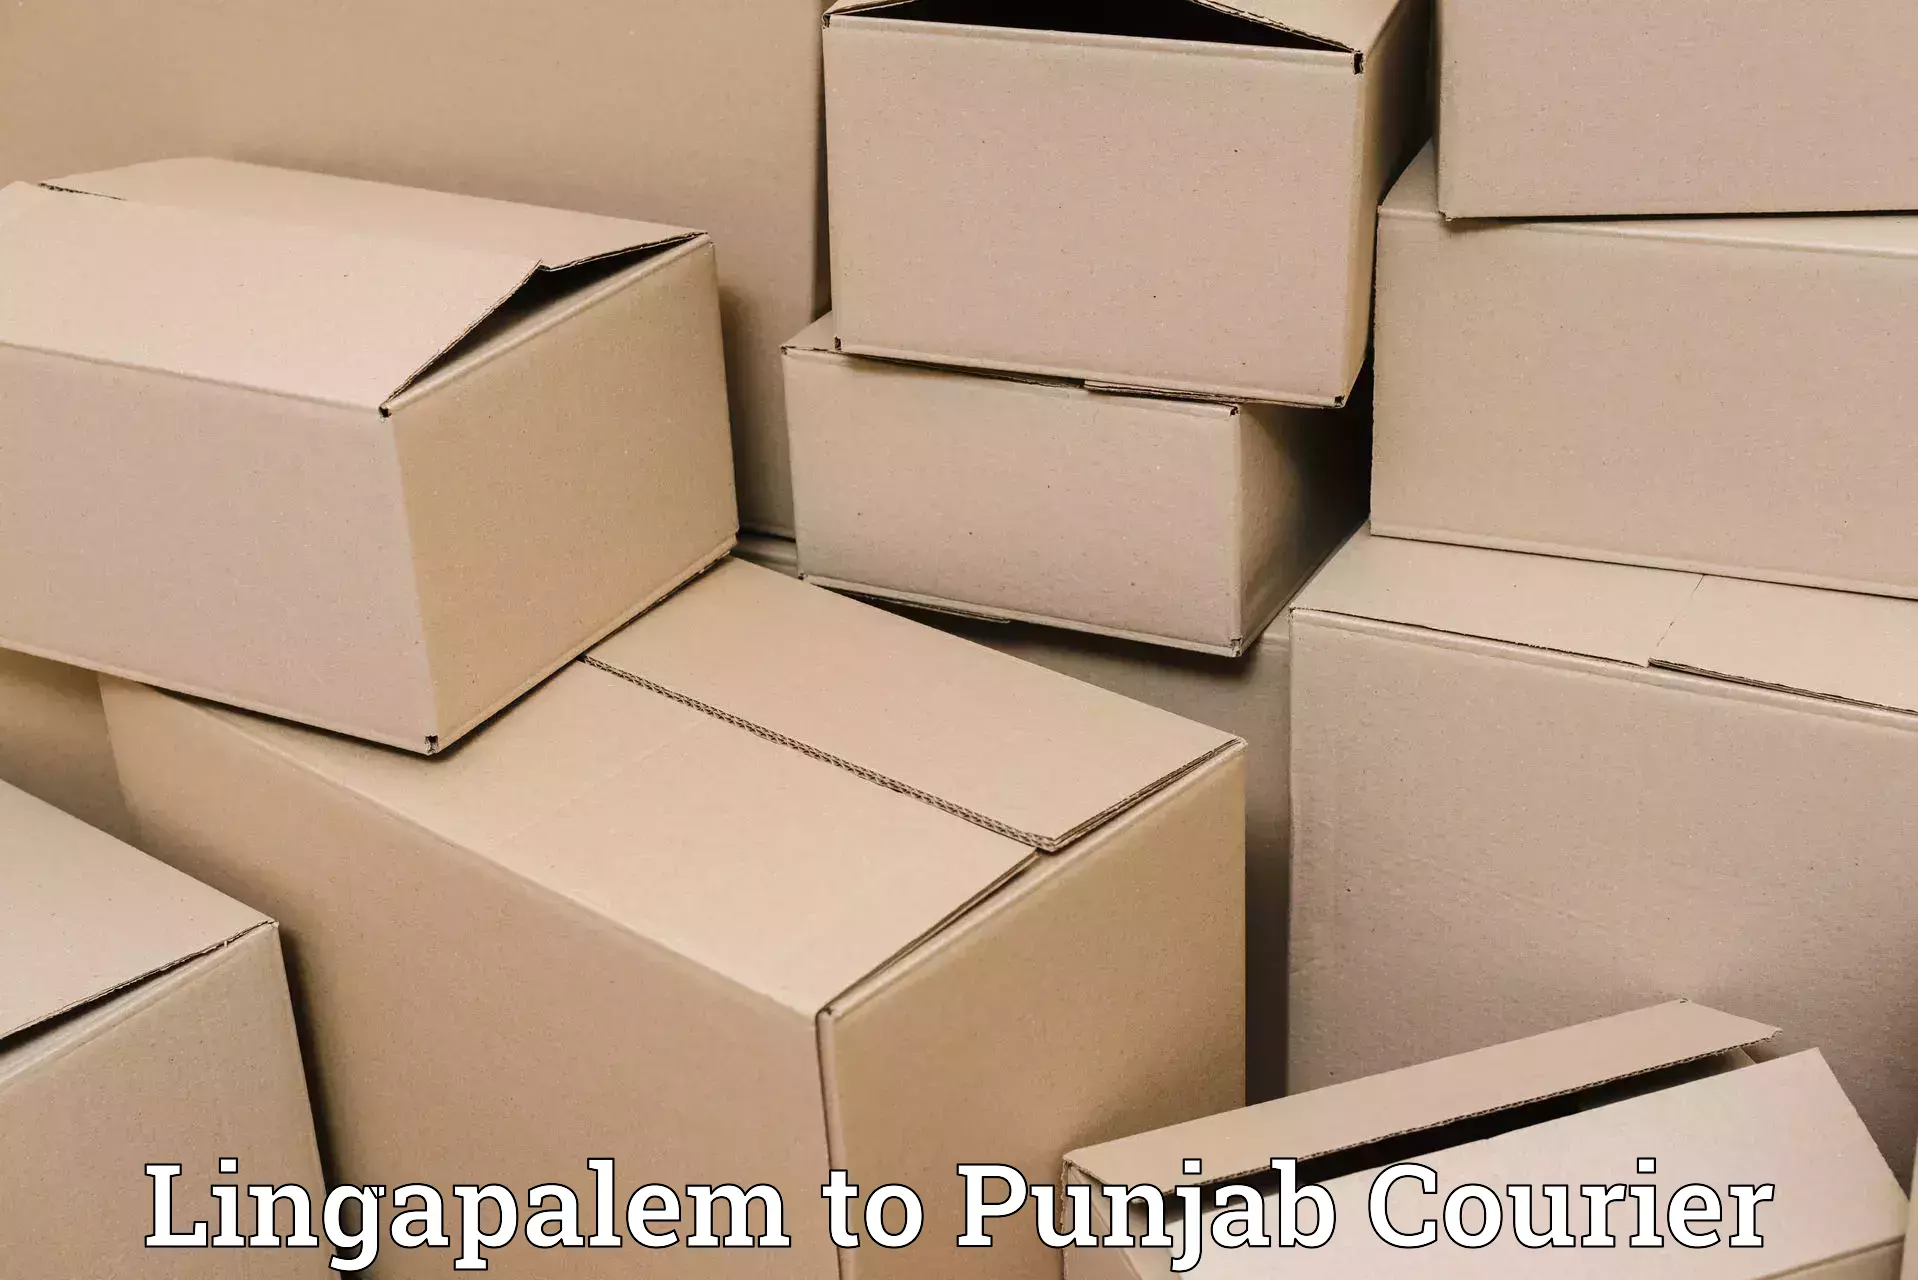 Next-day delivery options in Lingapalem to Punjab